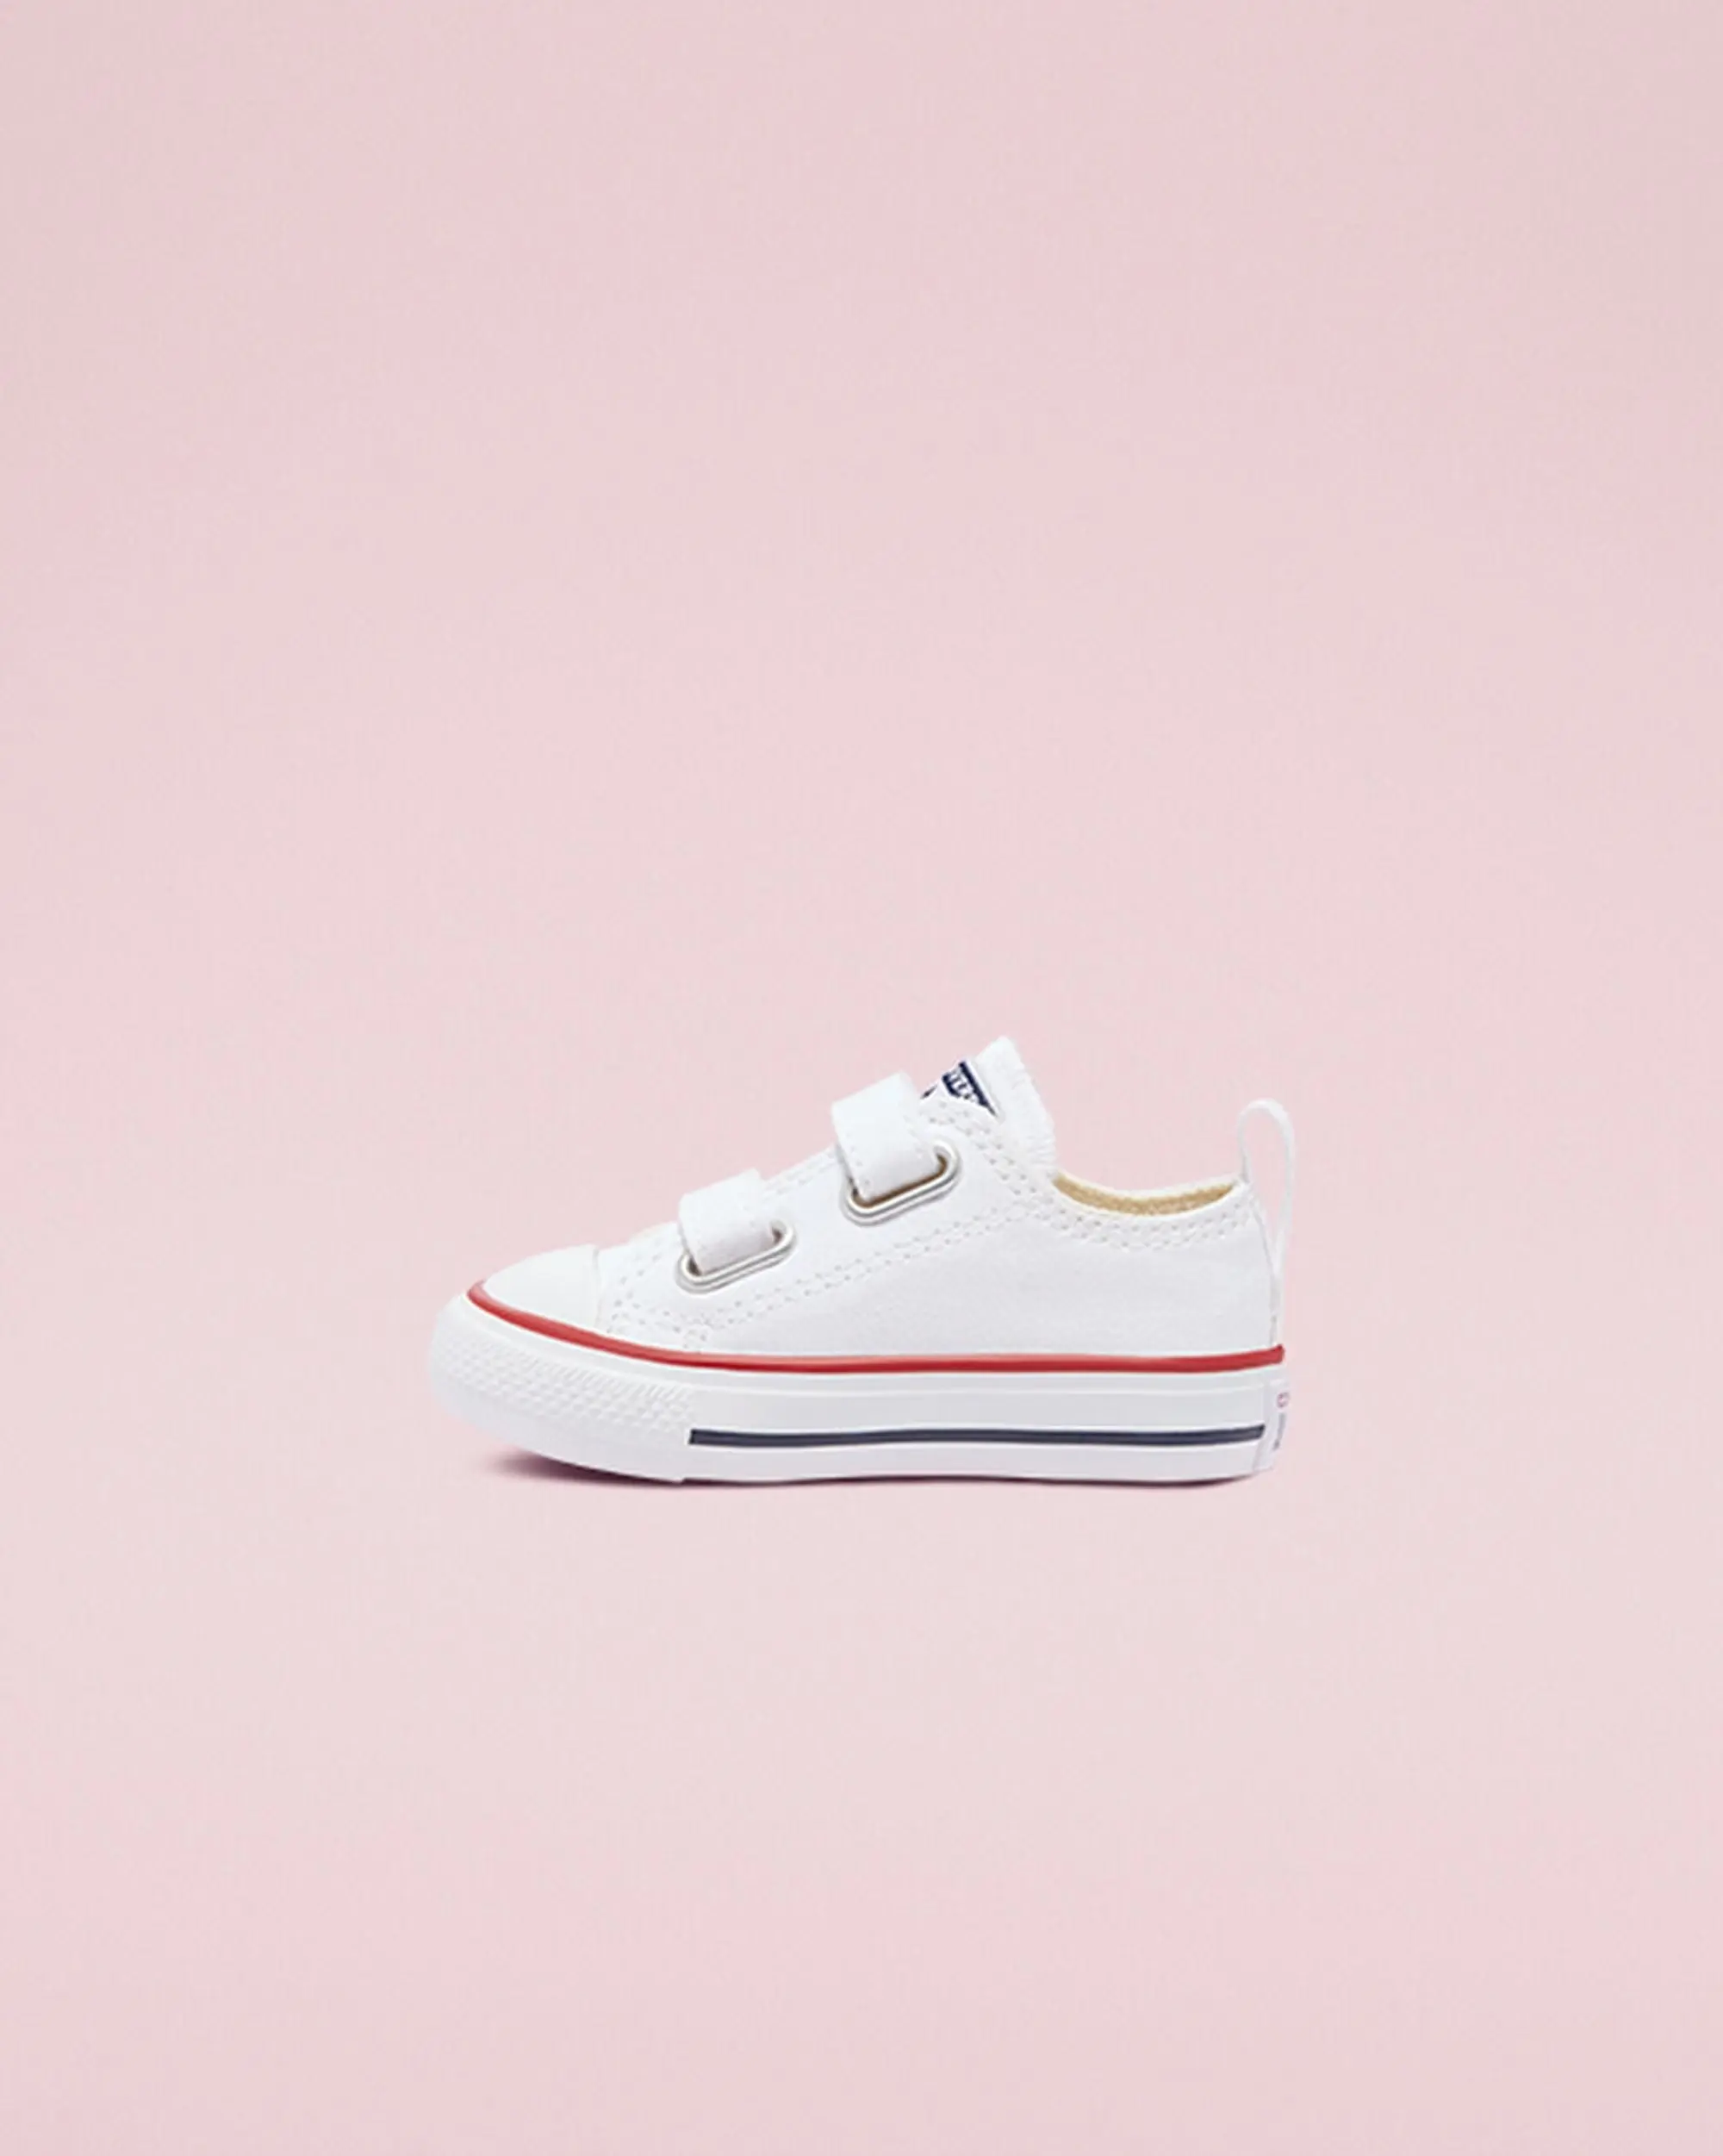 Converse Infant Unisex 2V Canvas Ox Trainers - White, White/Red/Blue